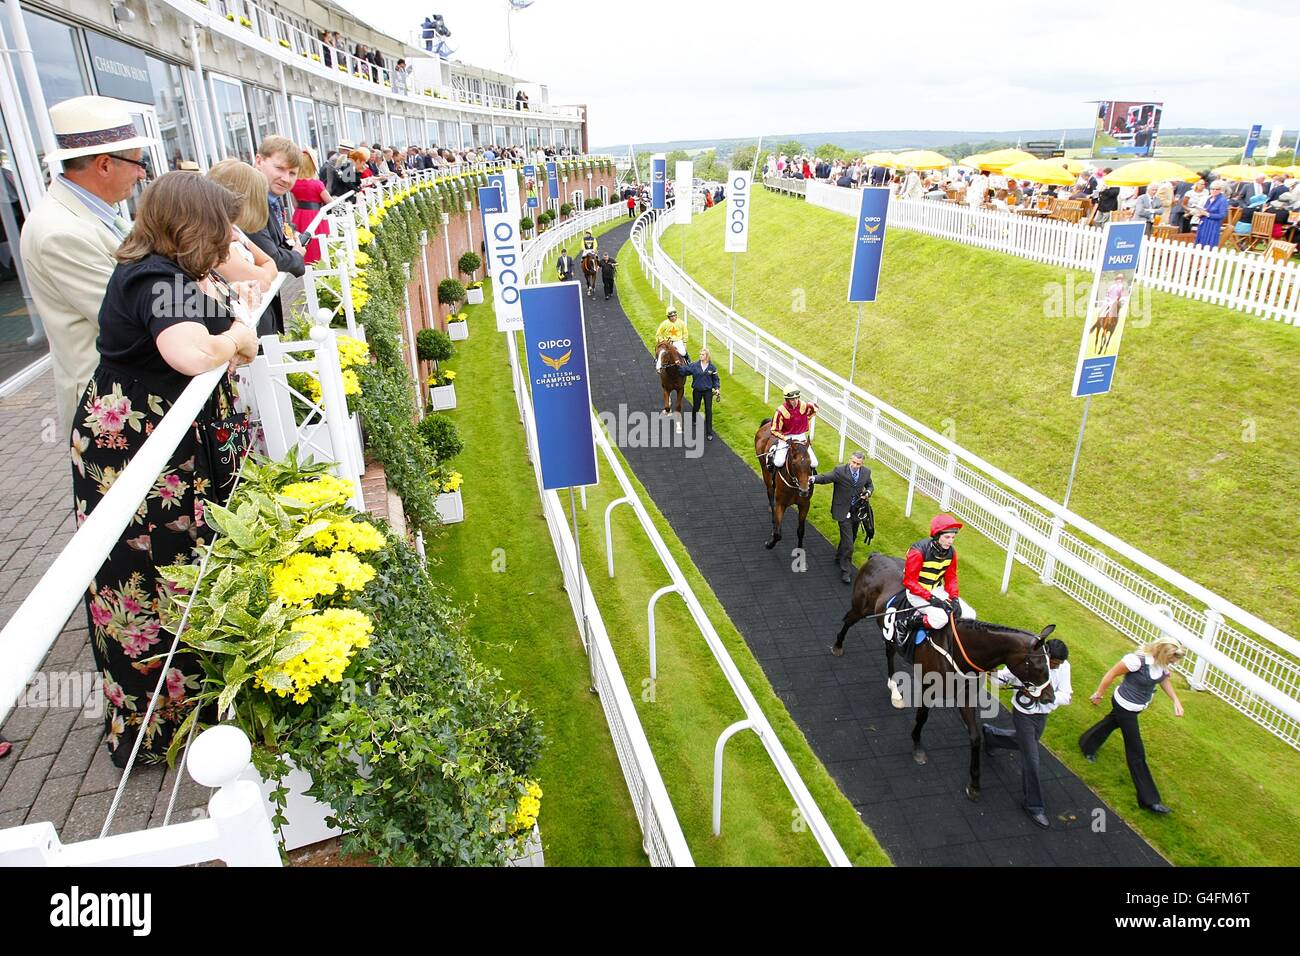 Horse Racing - Glorious Goodwood Festival 2011 - herrliche Sussex Stakes Tag - Goodwood Rennbahn Stockfoto